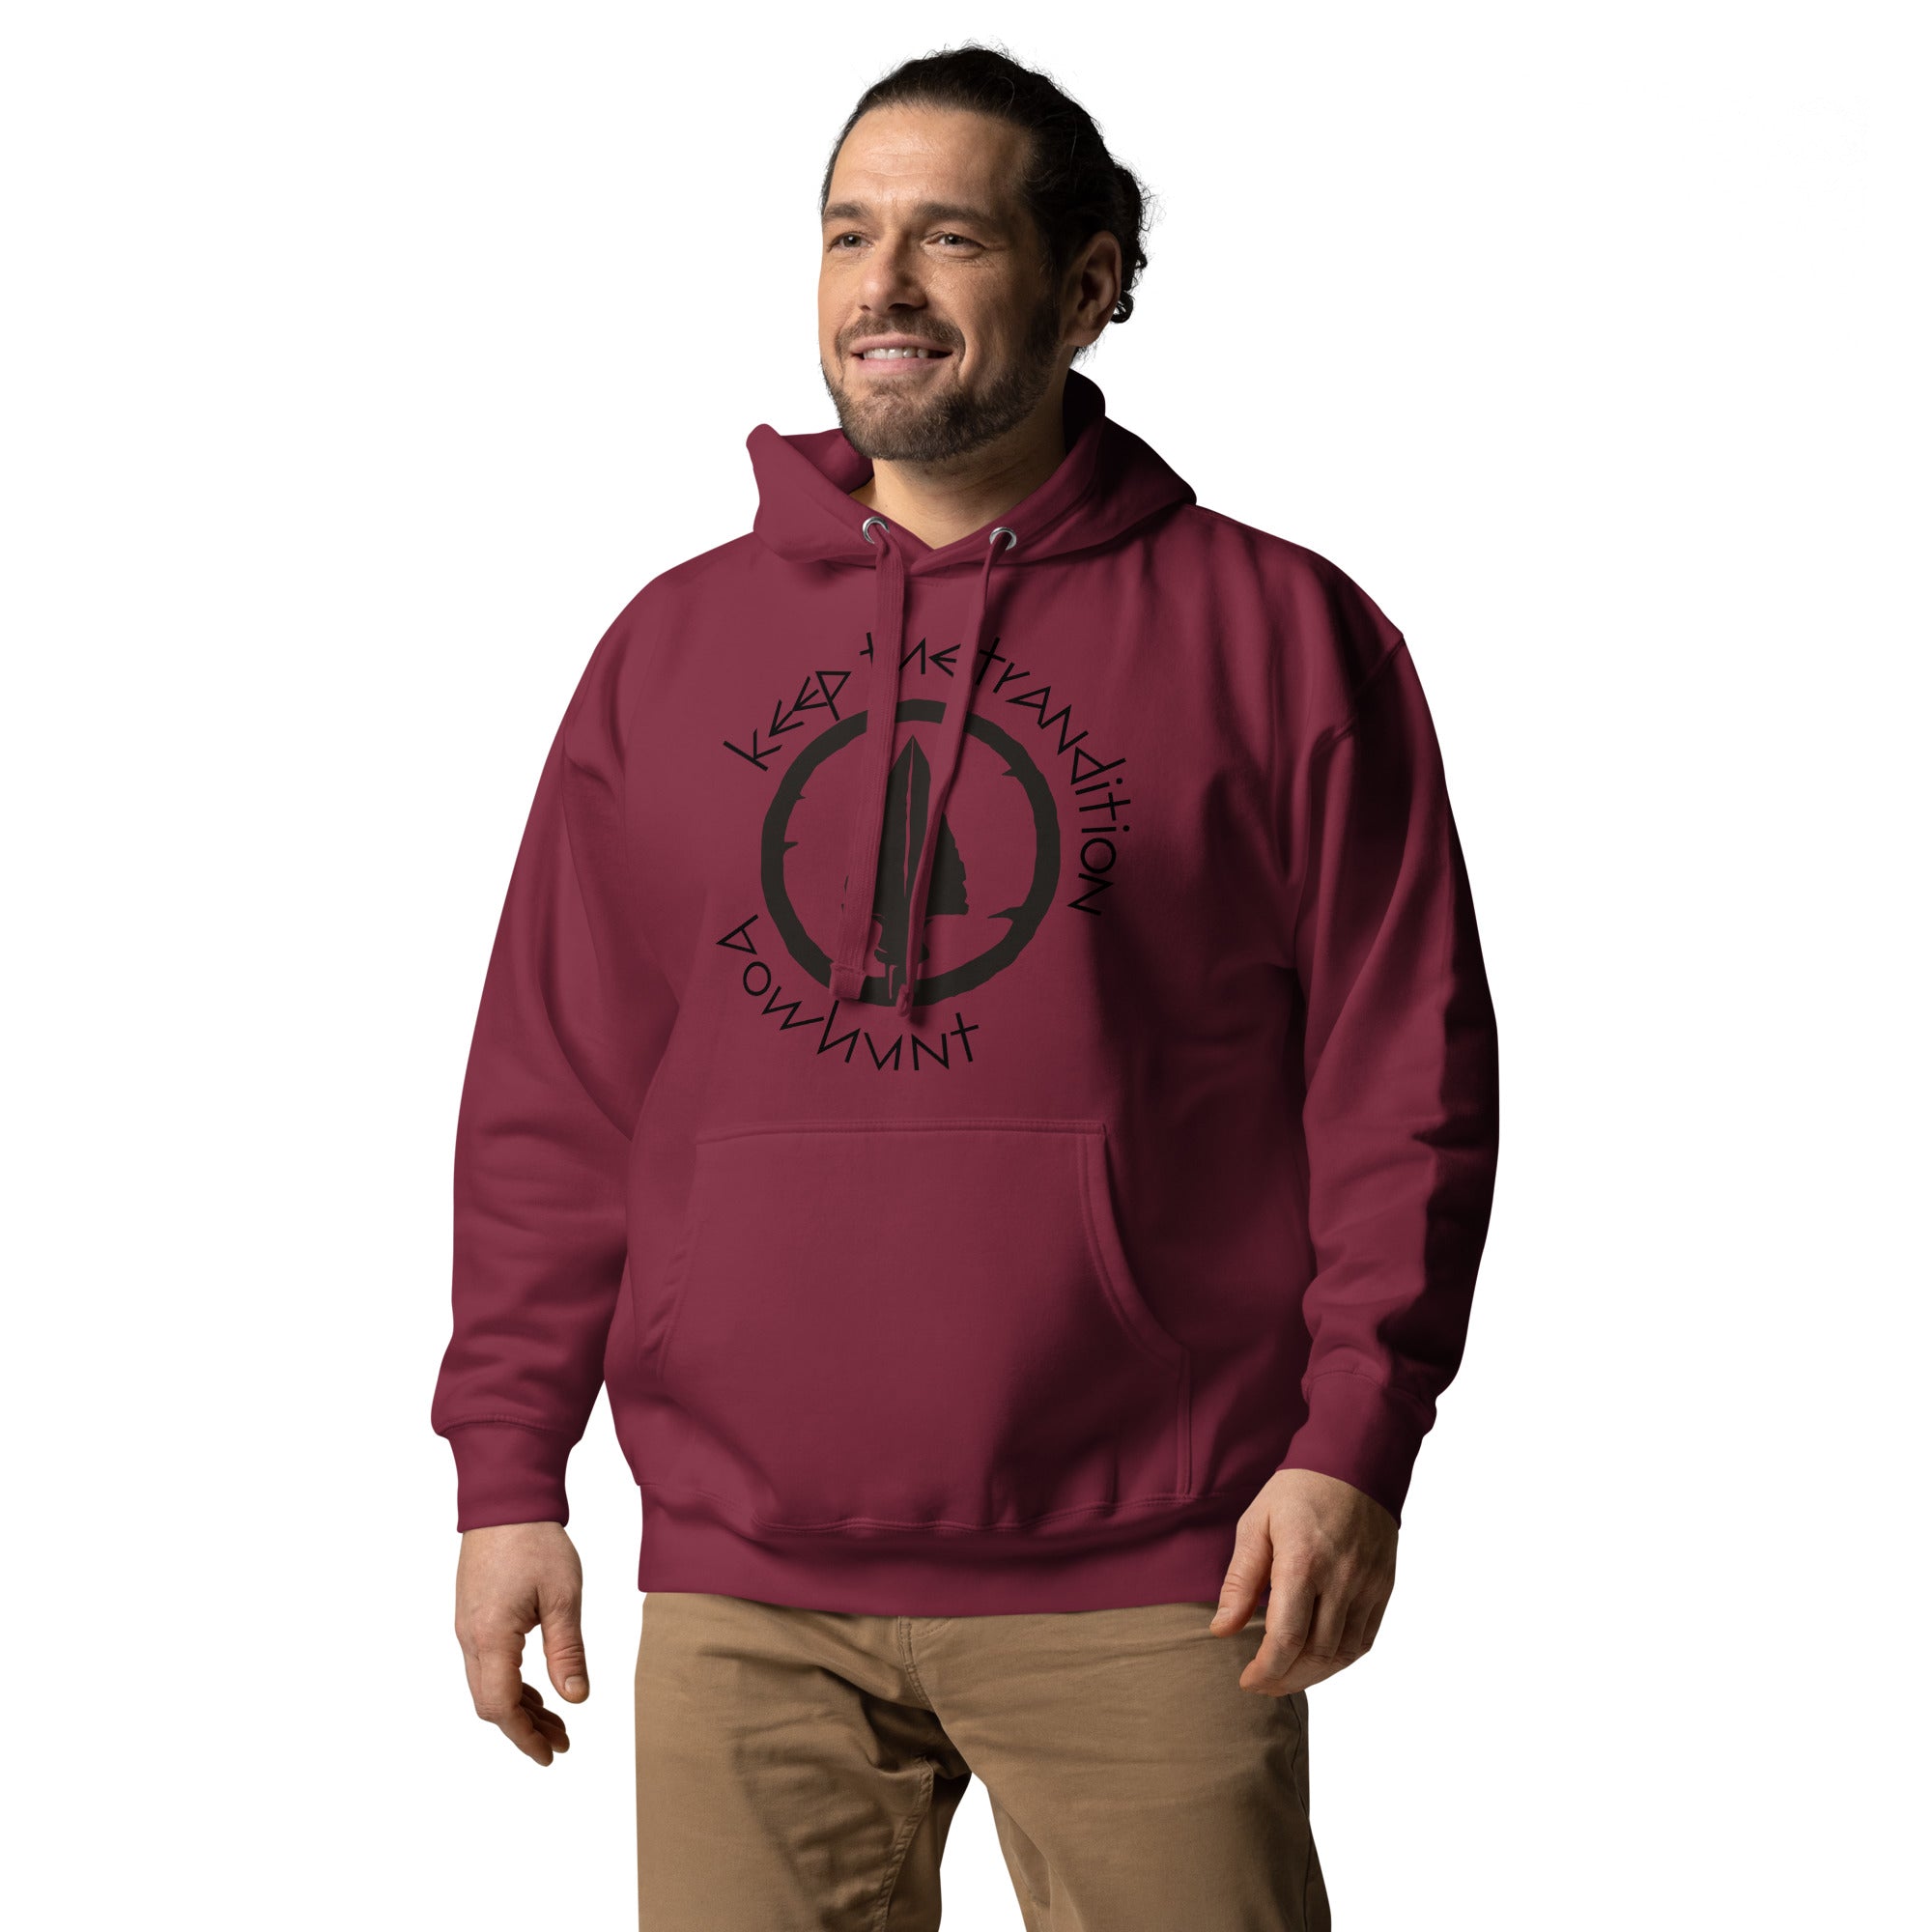 Keep The Tradition Premium Men's Heavy Hoodie - Bow Hunt